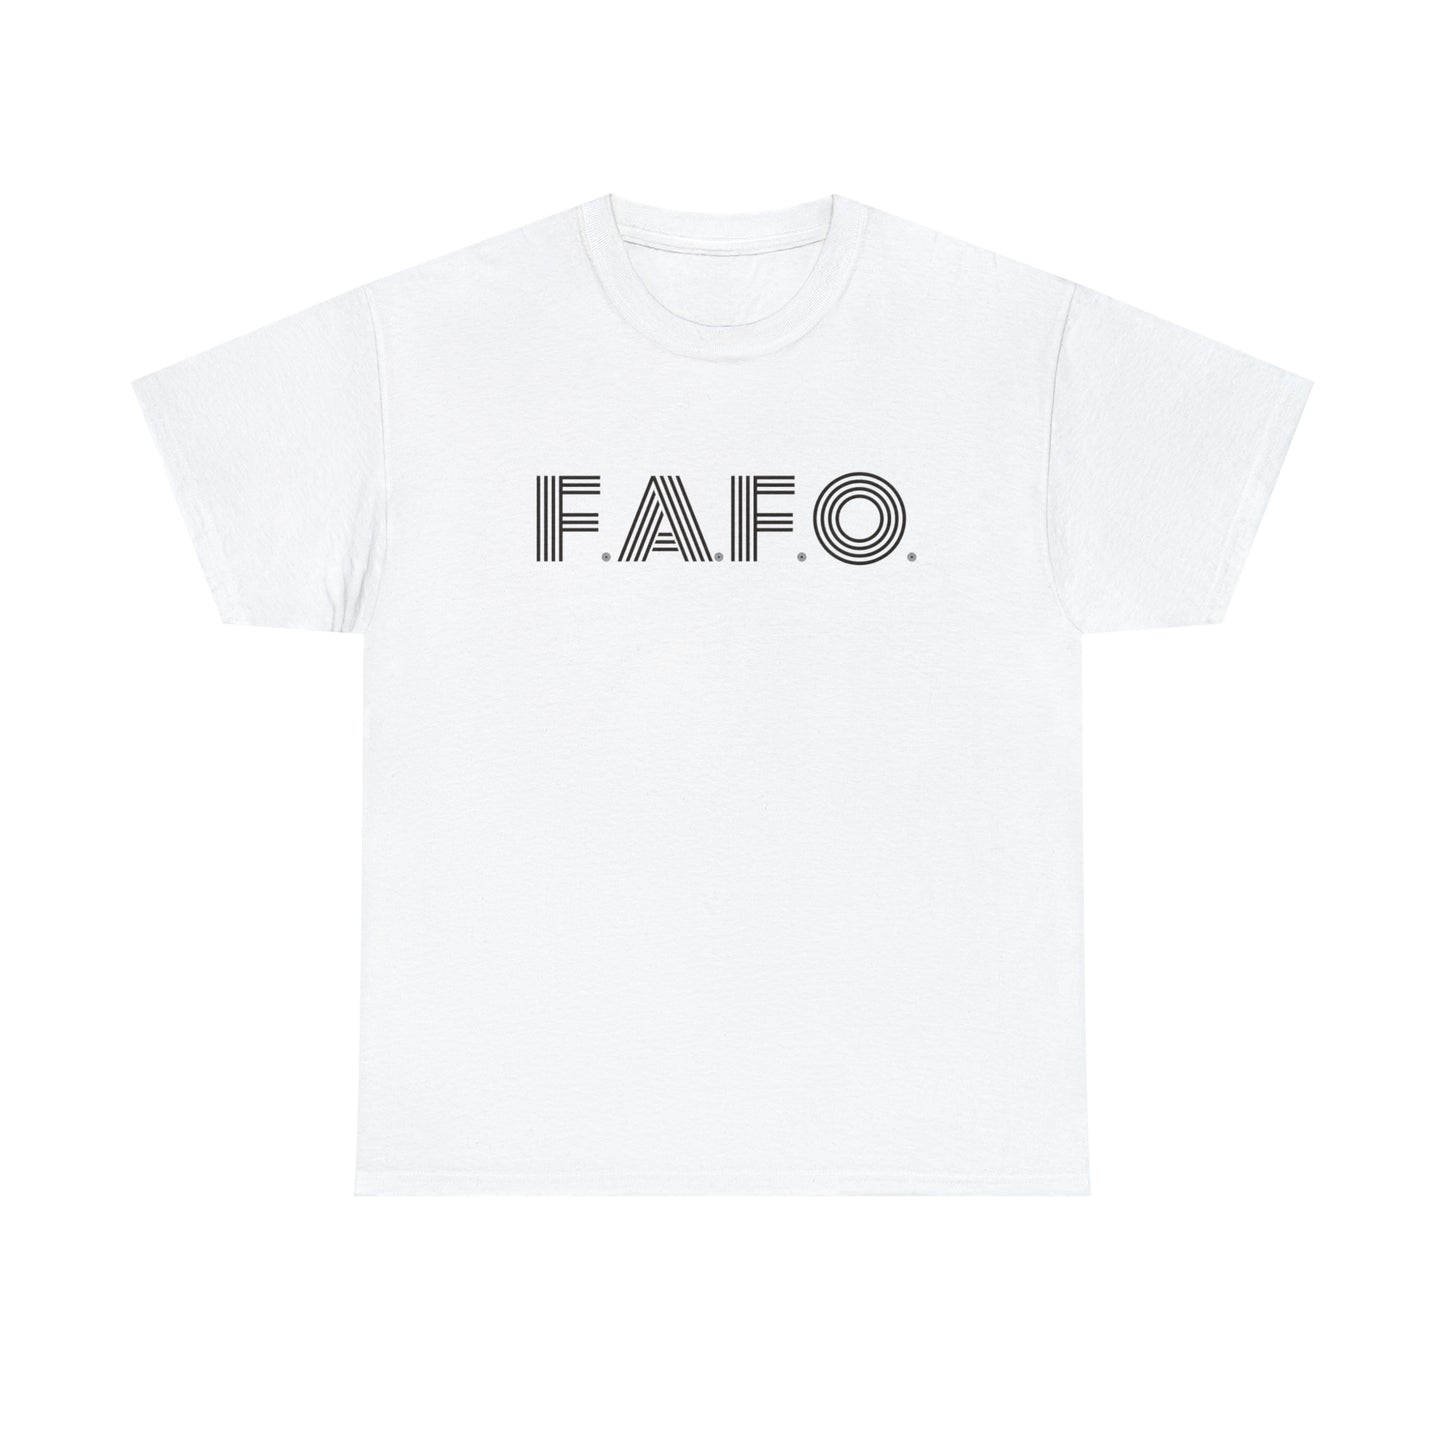 FAFO T-Shirt For Fuck Around And Find Out TShirt For Sarcastic T Shirt For Don't Push Your Luck Shirt